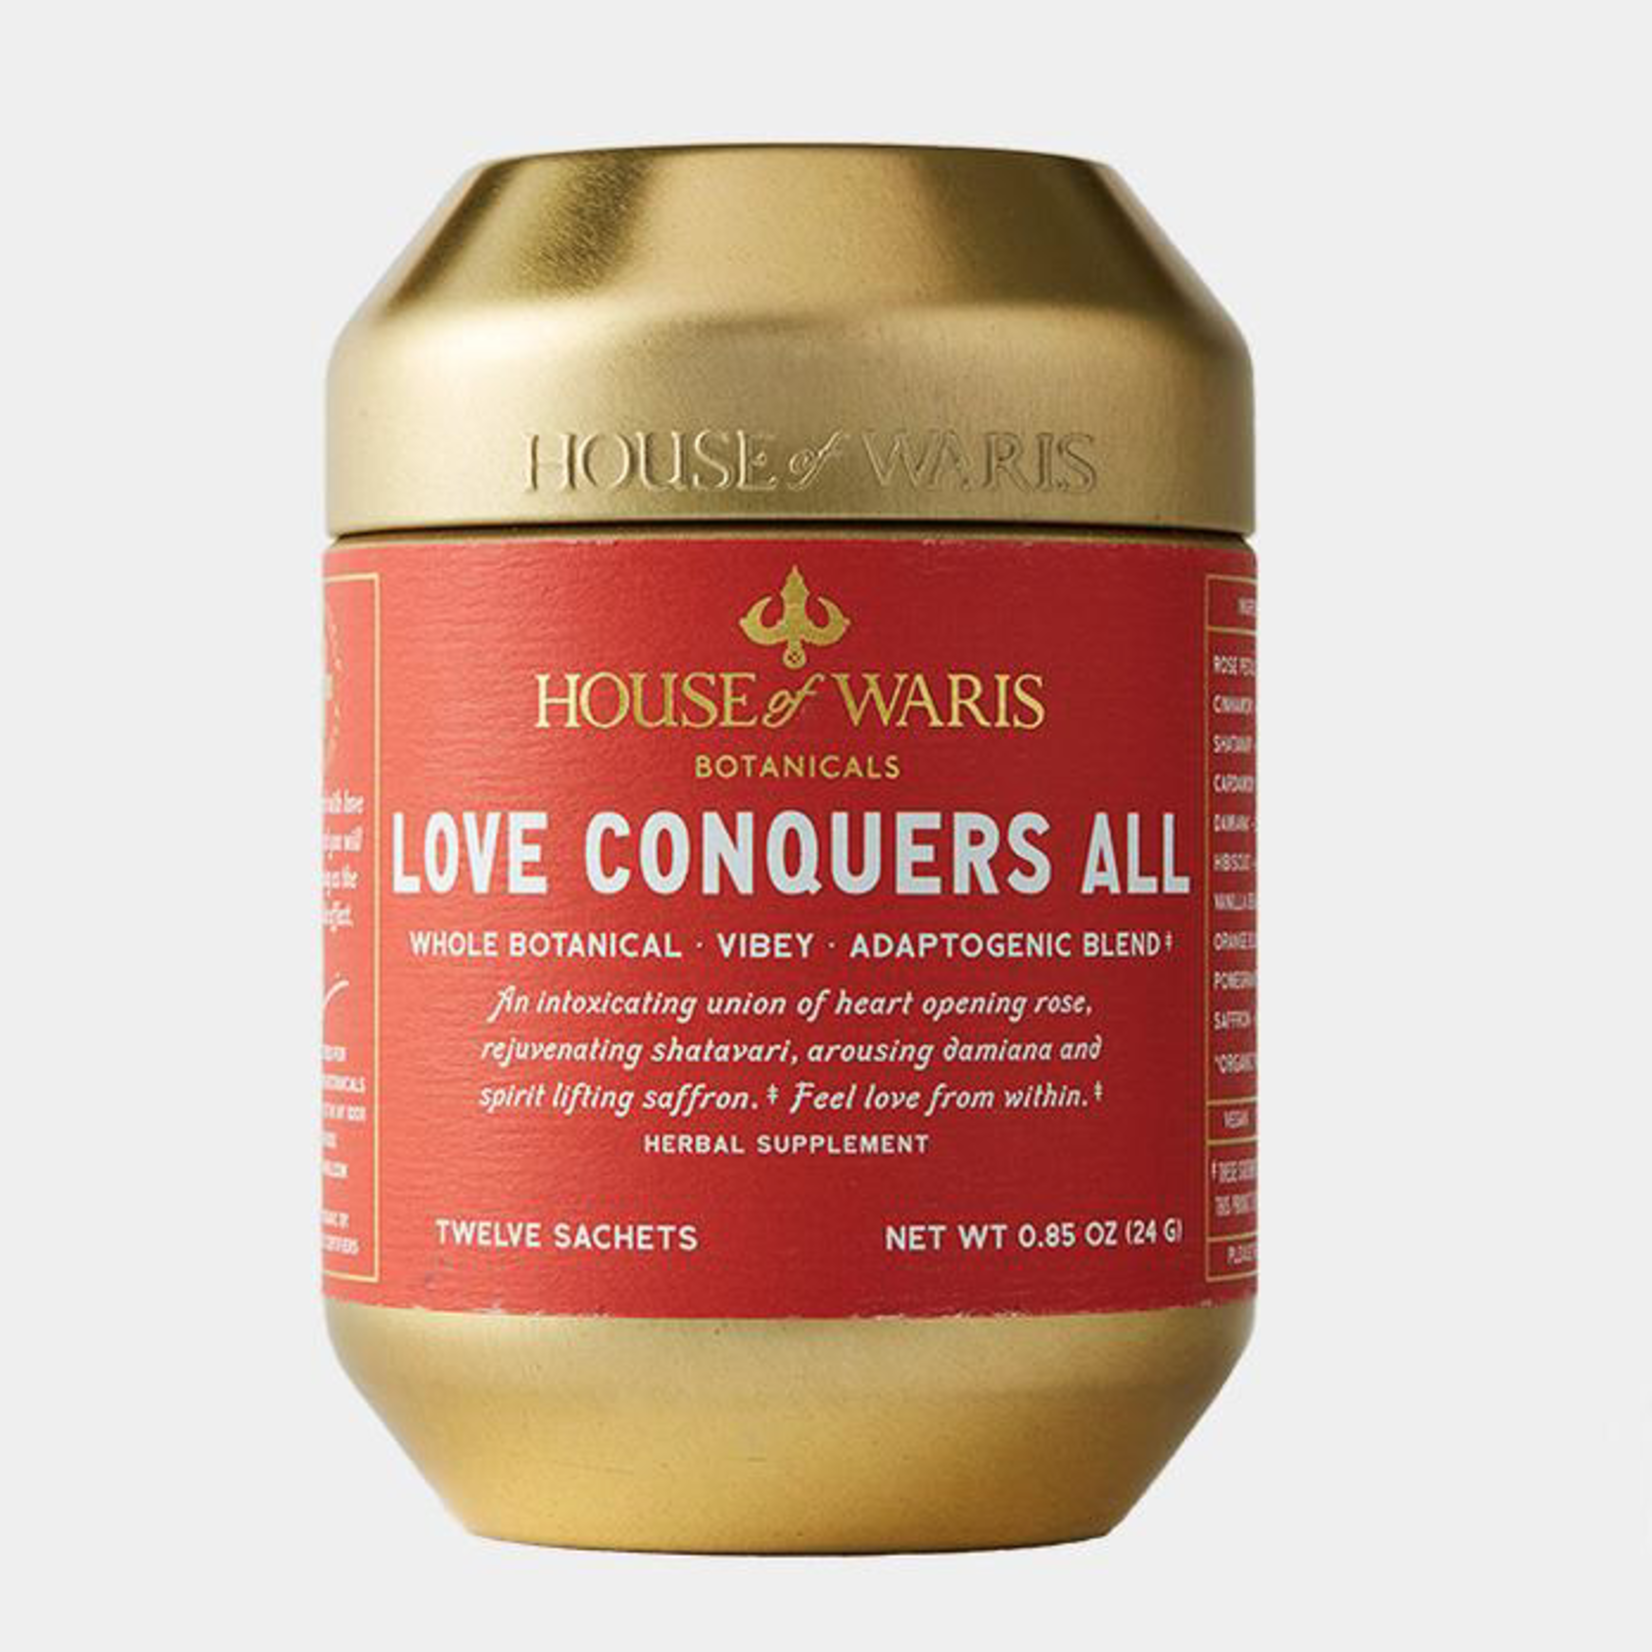 house of Waris botanicals love conquers all